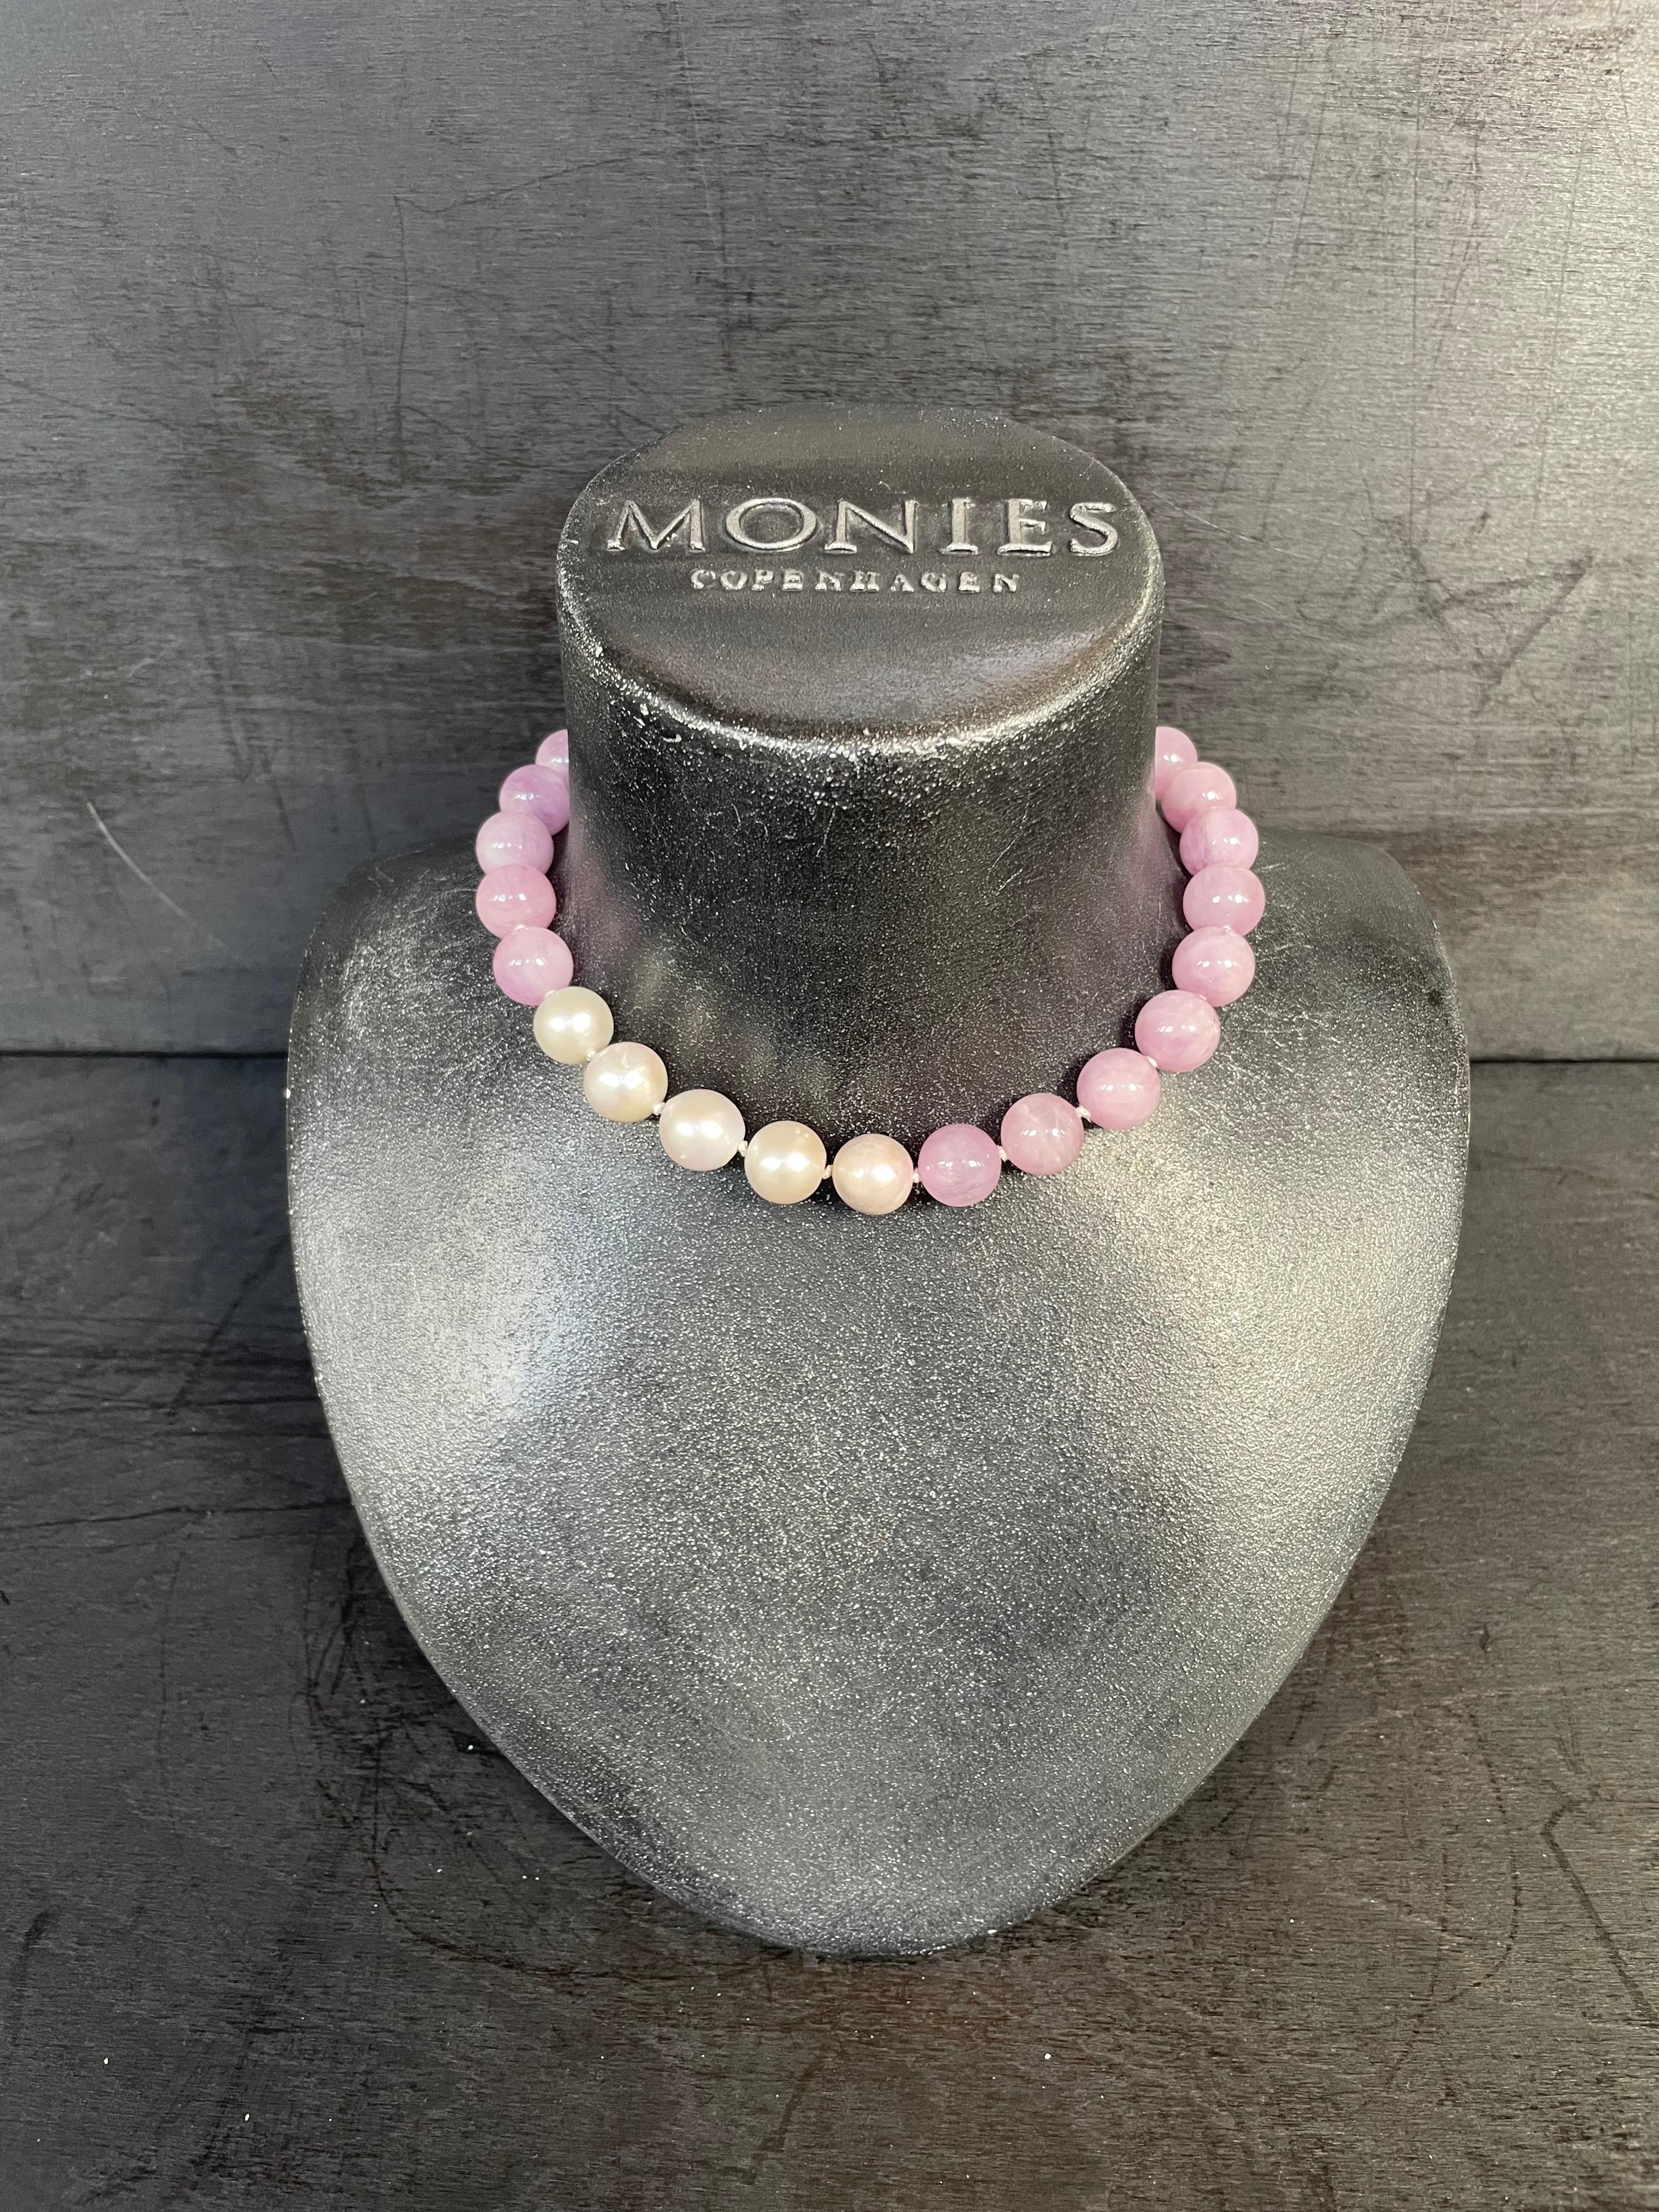 One-of-a-kind statement necklace from the Danish jewellery brand, Monies.
Made in Lavender Kunzite and Freshwater Pearls with a leather clasp.

Handcrafted in the Monies Atelier in Copenhagen.